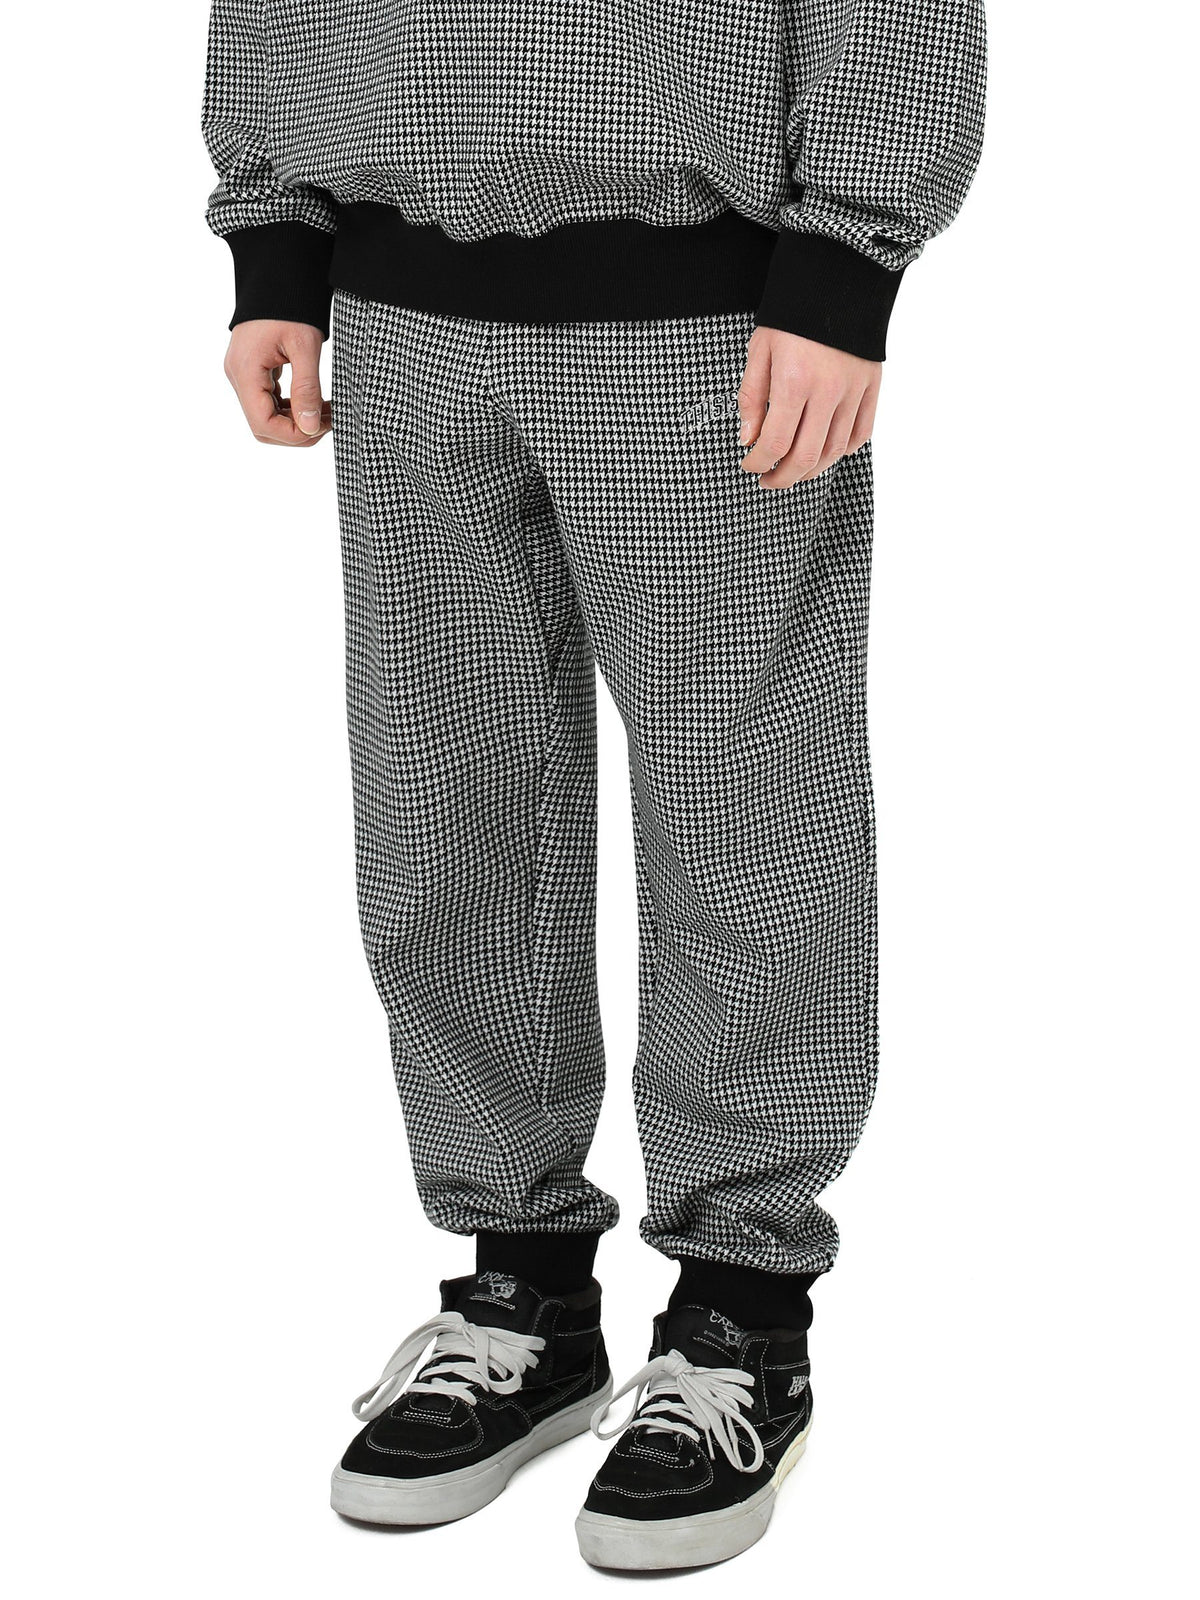 Houndstooth Sweatpant Pants 